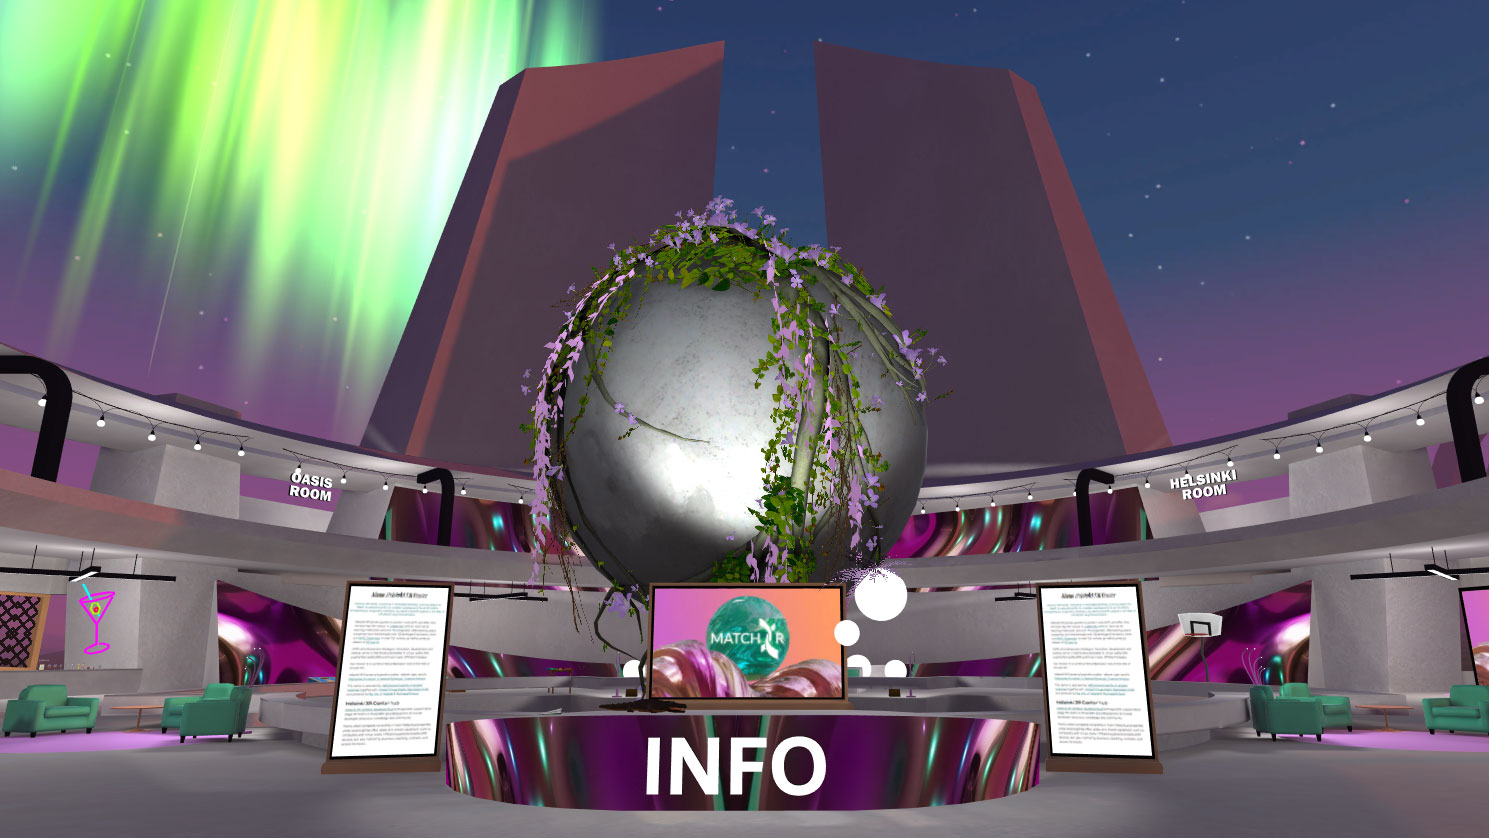 Screenshot from AltspaceVR: an info desk in an event space, illuminated by northern lights.